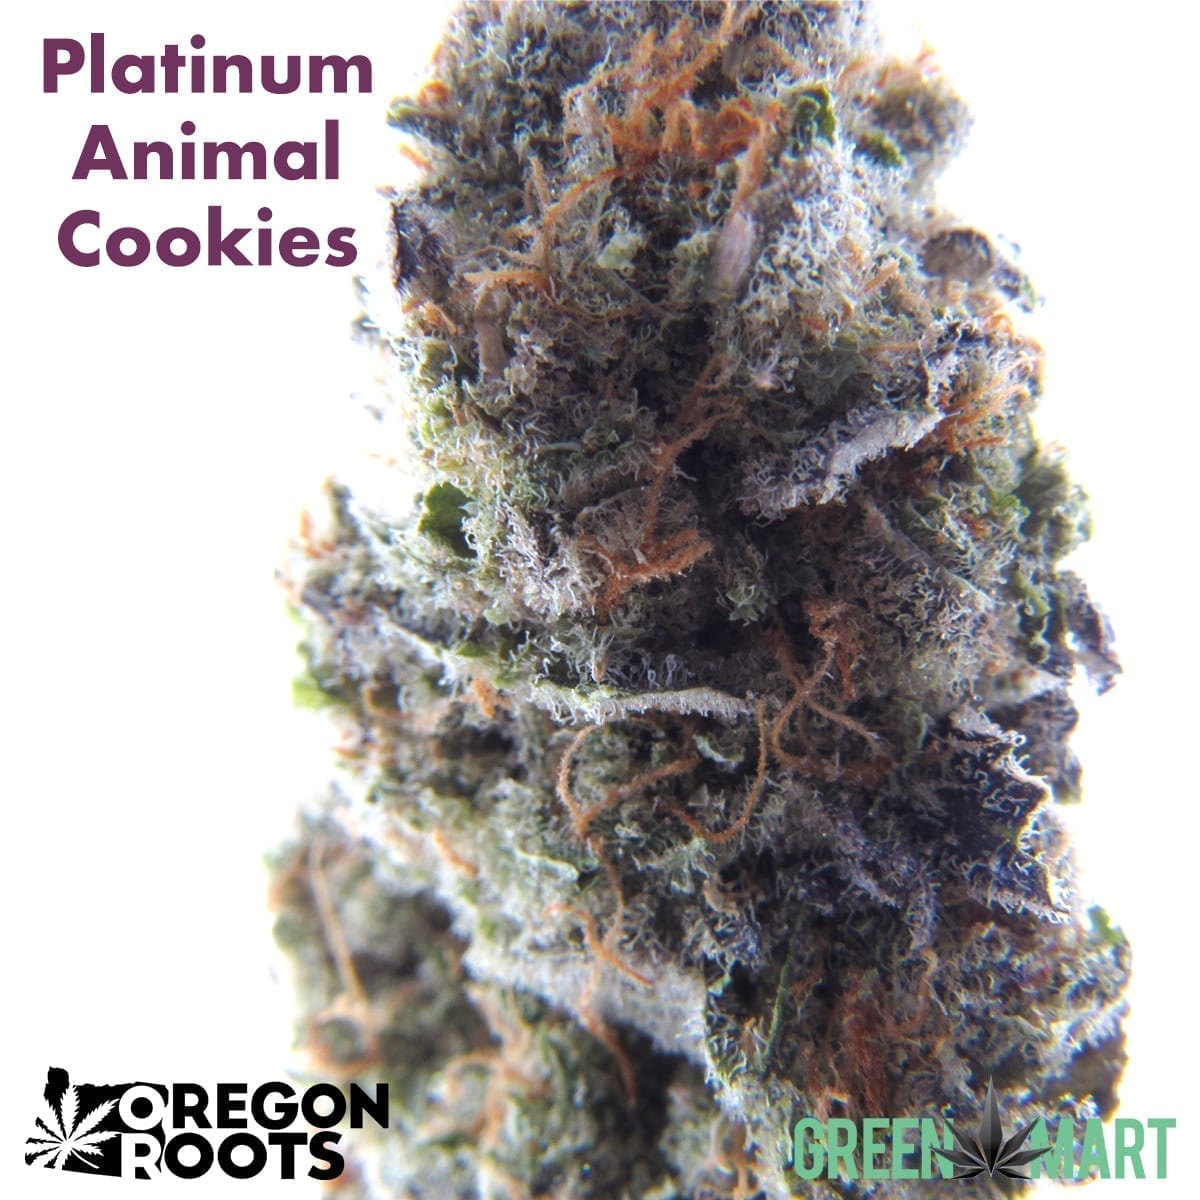 Platinum Animal Cookies by Oregon Roots